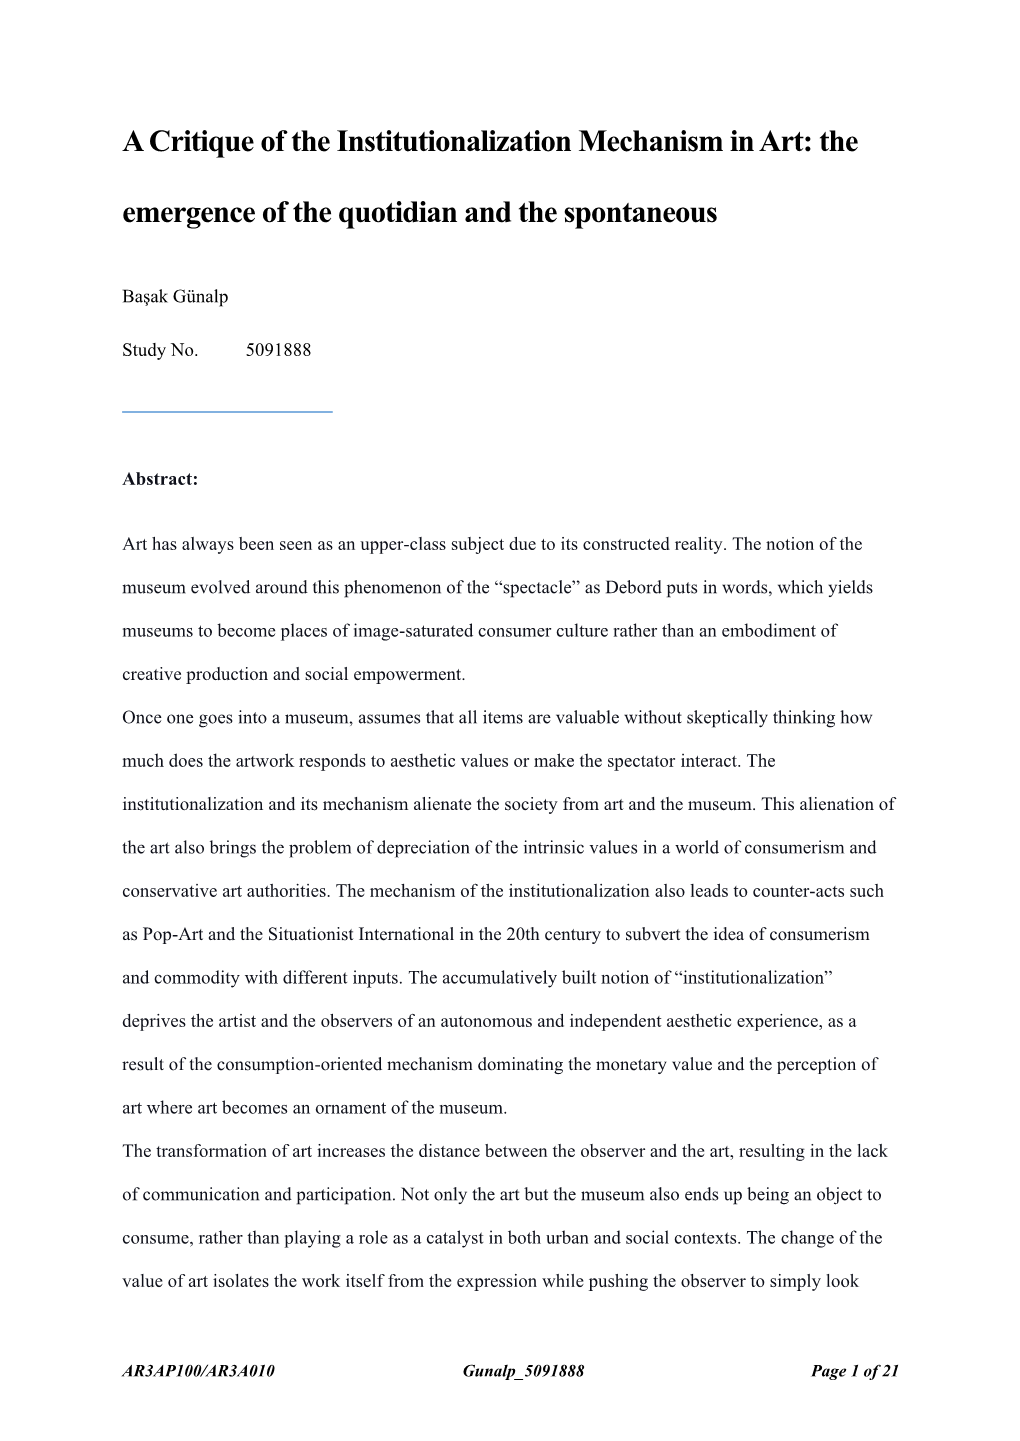 A Critique of the Institutionalization Mechanism in Art: the Emergence of the Quotidian and the Spontaneous